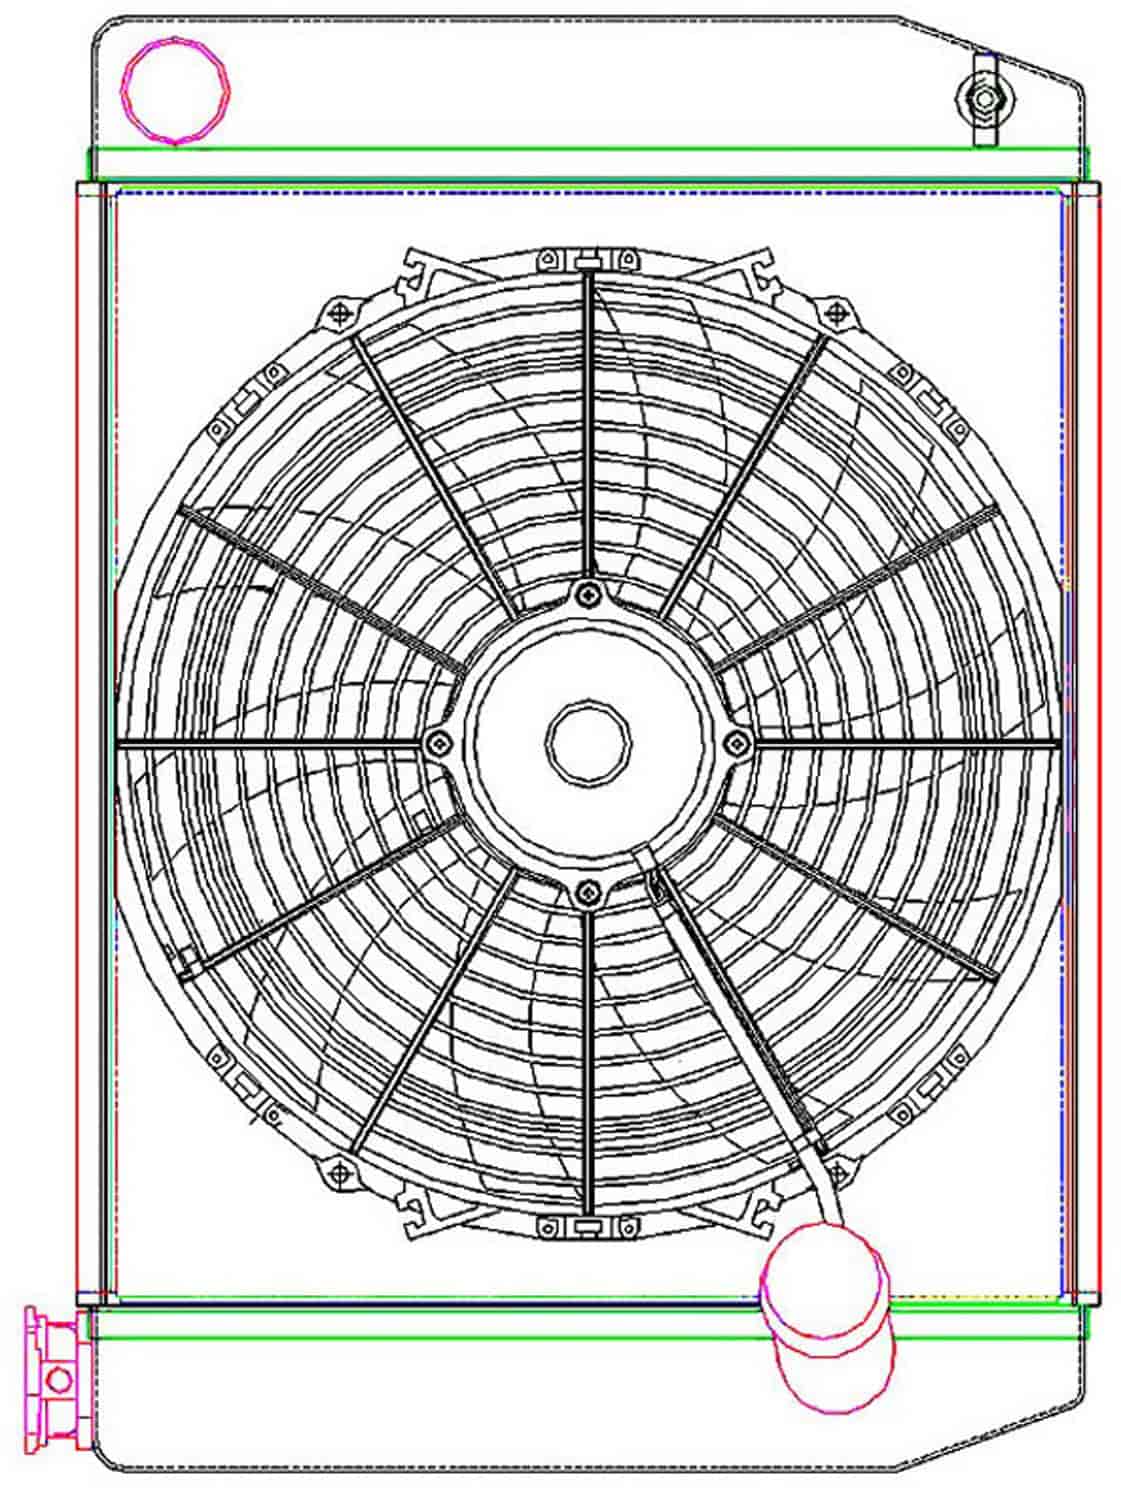 MegaCool ComboUnit Universal Fit Radiator and Fan Single Pass Crossflow Design 22" x 15.50" with No Options